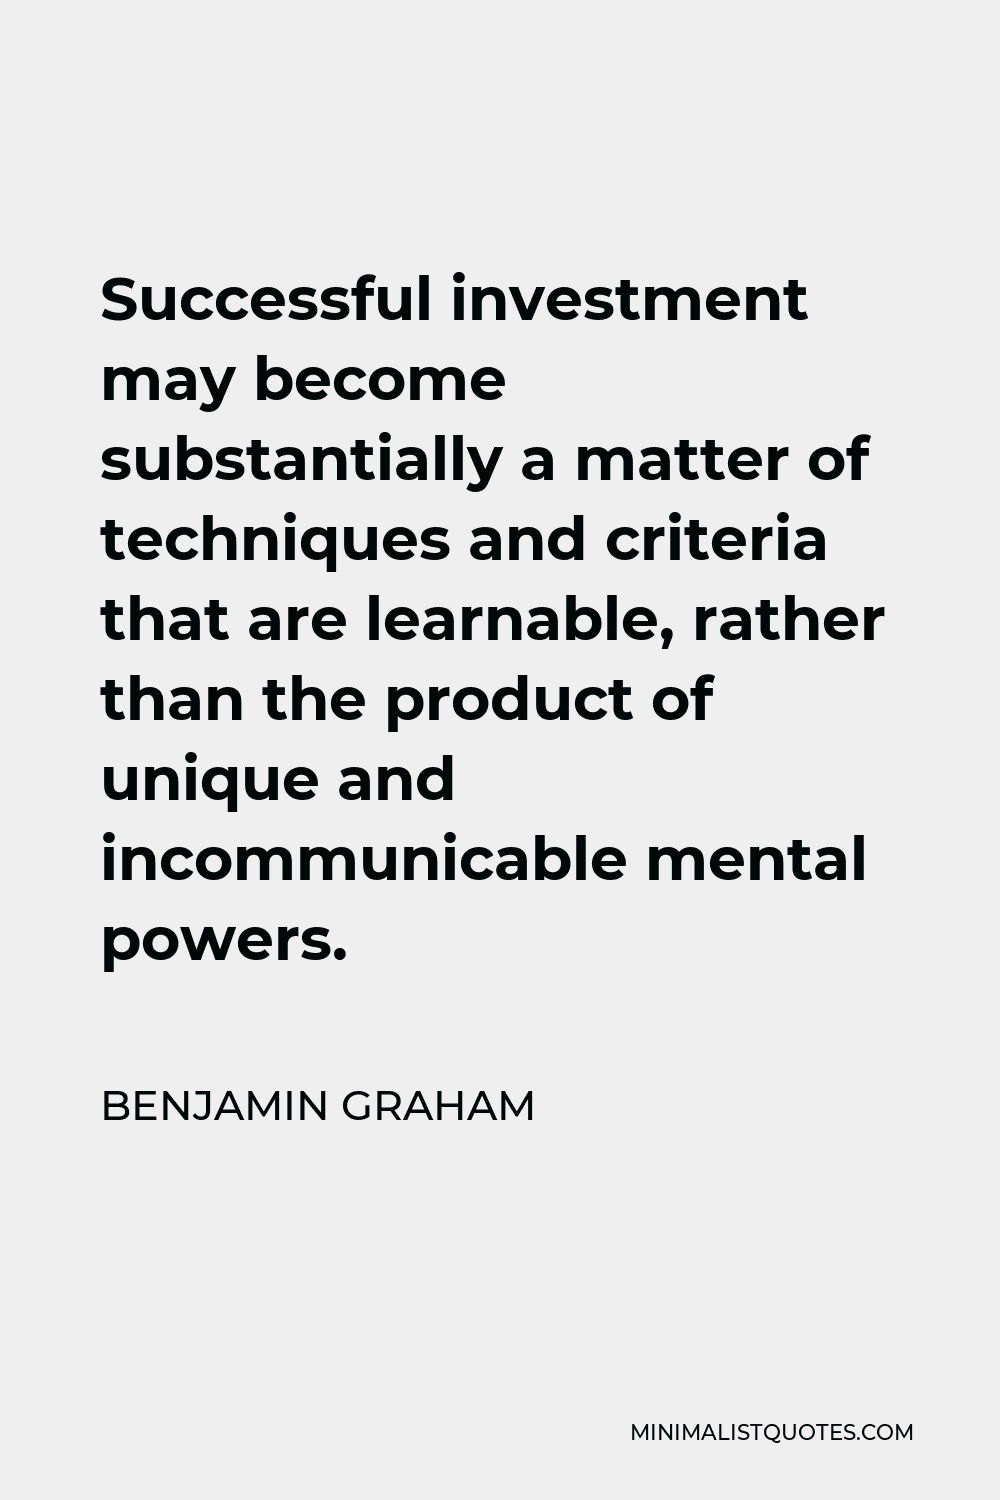 Benjamin Graham Quote - Successful investment may become substantially a matter of techniques and criteria that are learnable, rather than the product of unique and incommunicable mental powers.